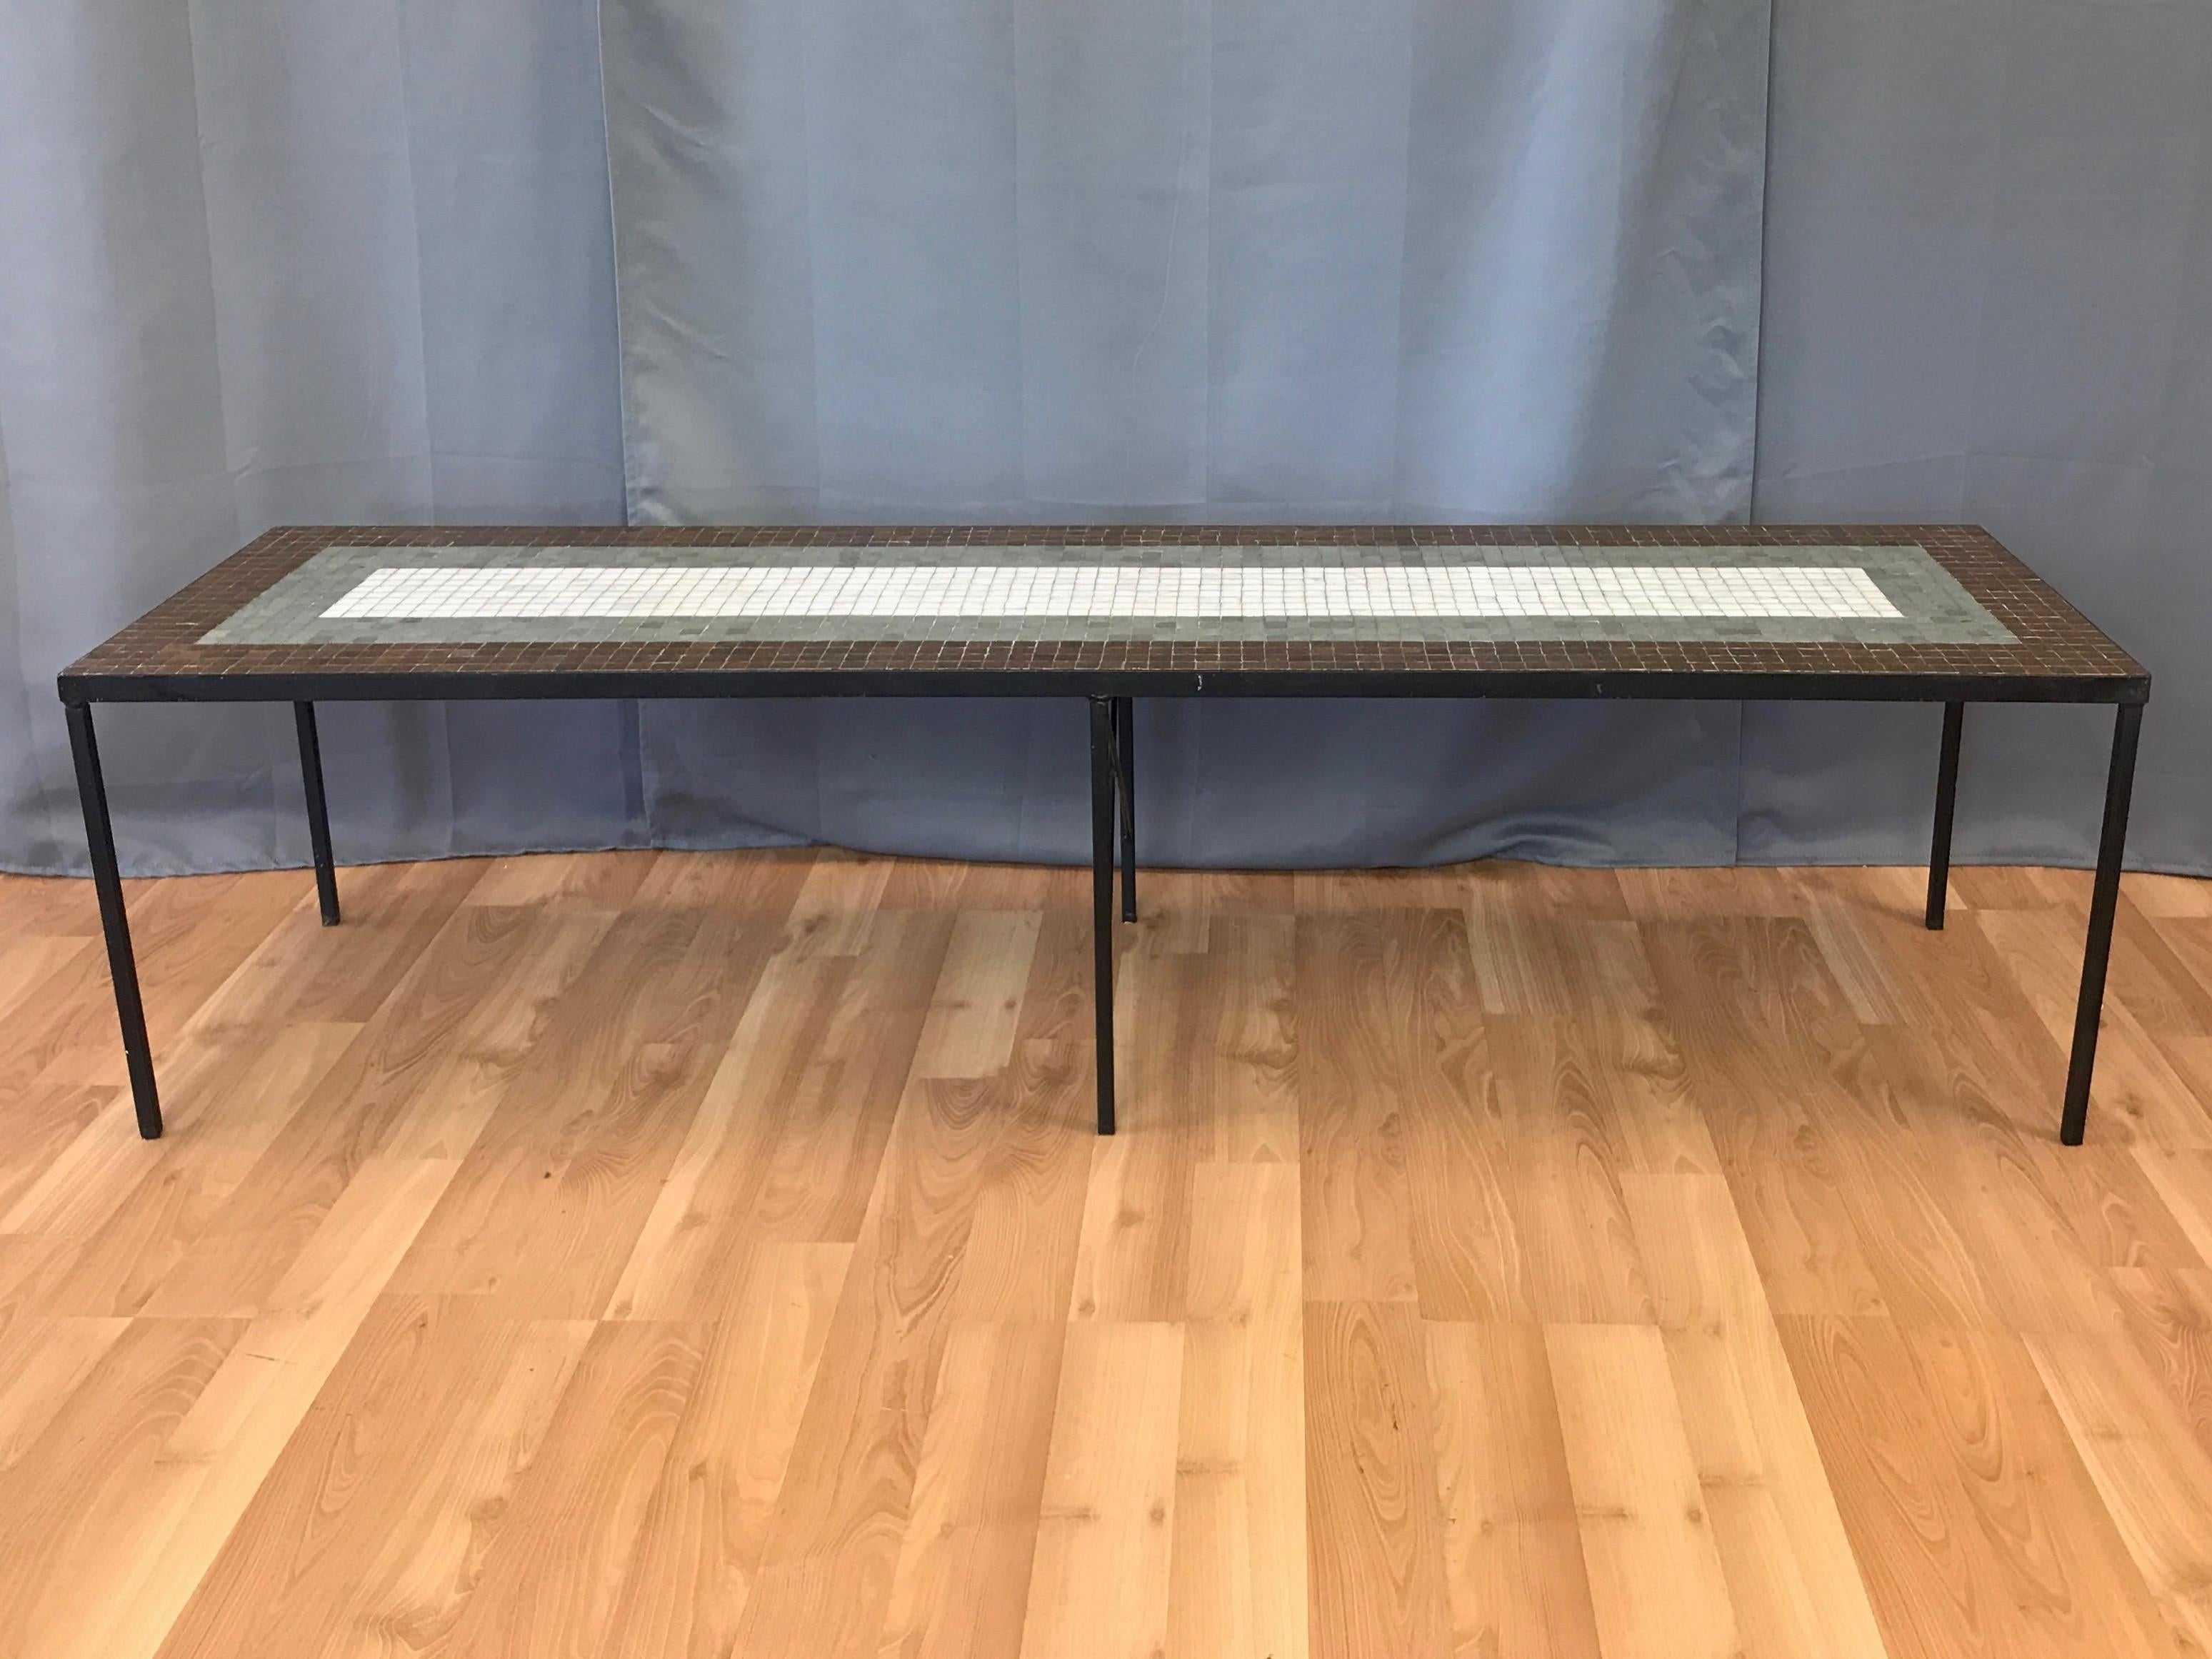 A 1960s six-foot-long Paul McCobb-style tile and iron coffee table or bench.

Very handsome top with 1” square glass tiles in white, grey, and brown affixed to wood. Satin black enameled iron frame and legs in the Minimalist style of Paul McCobb.